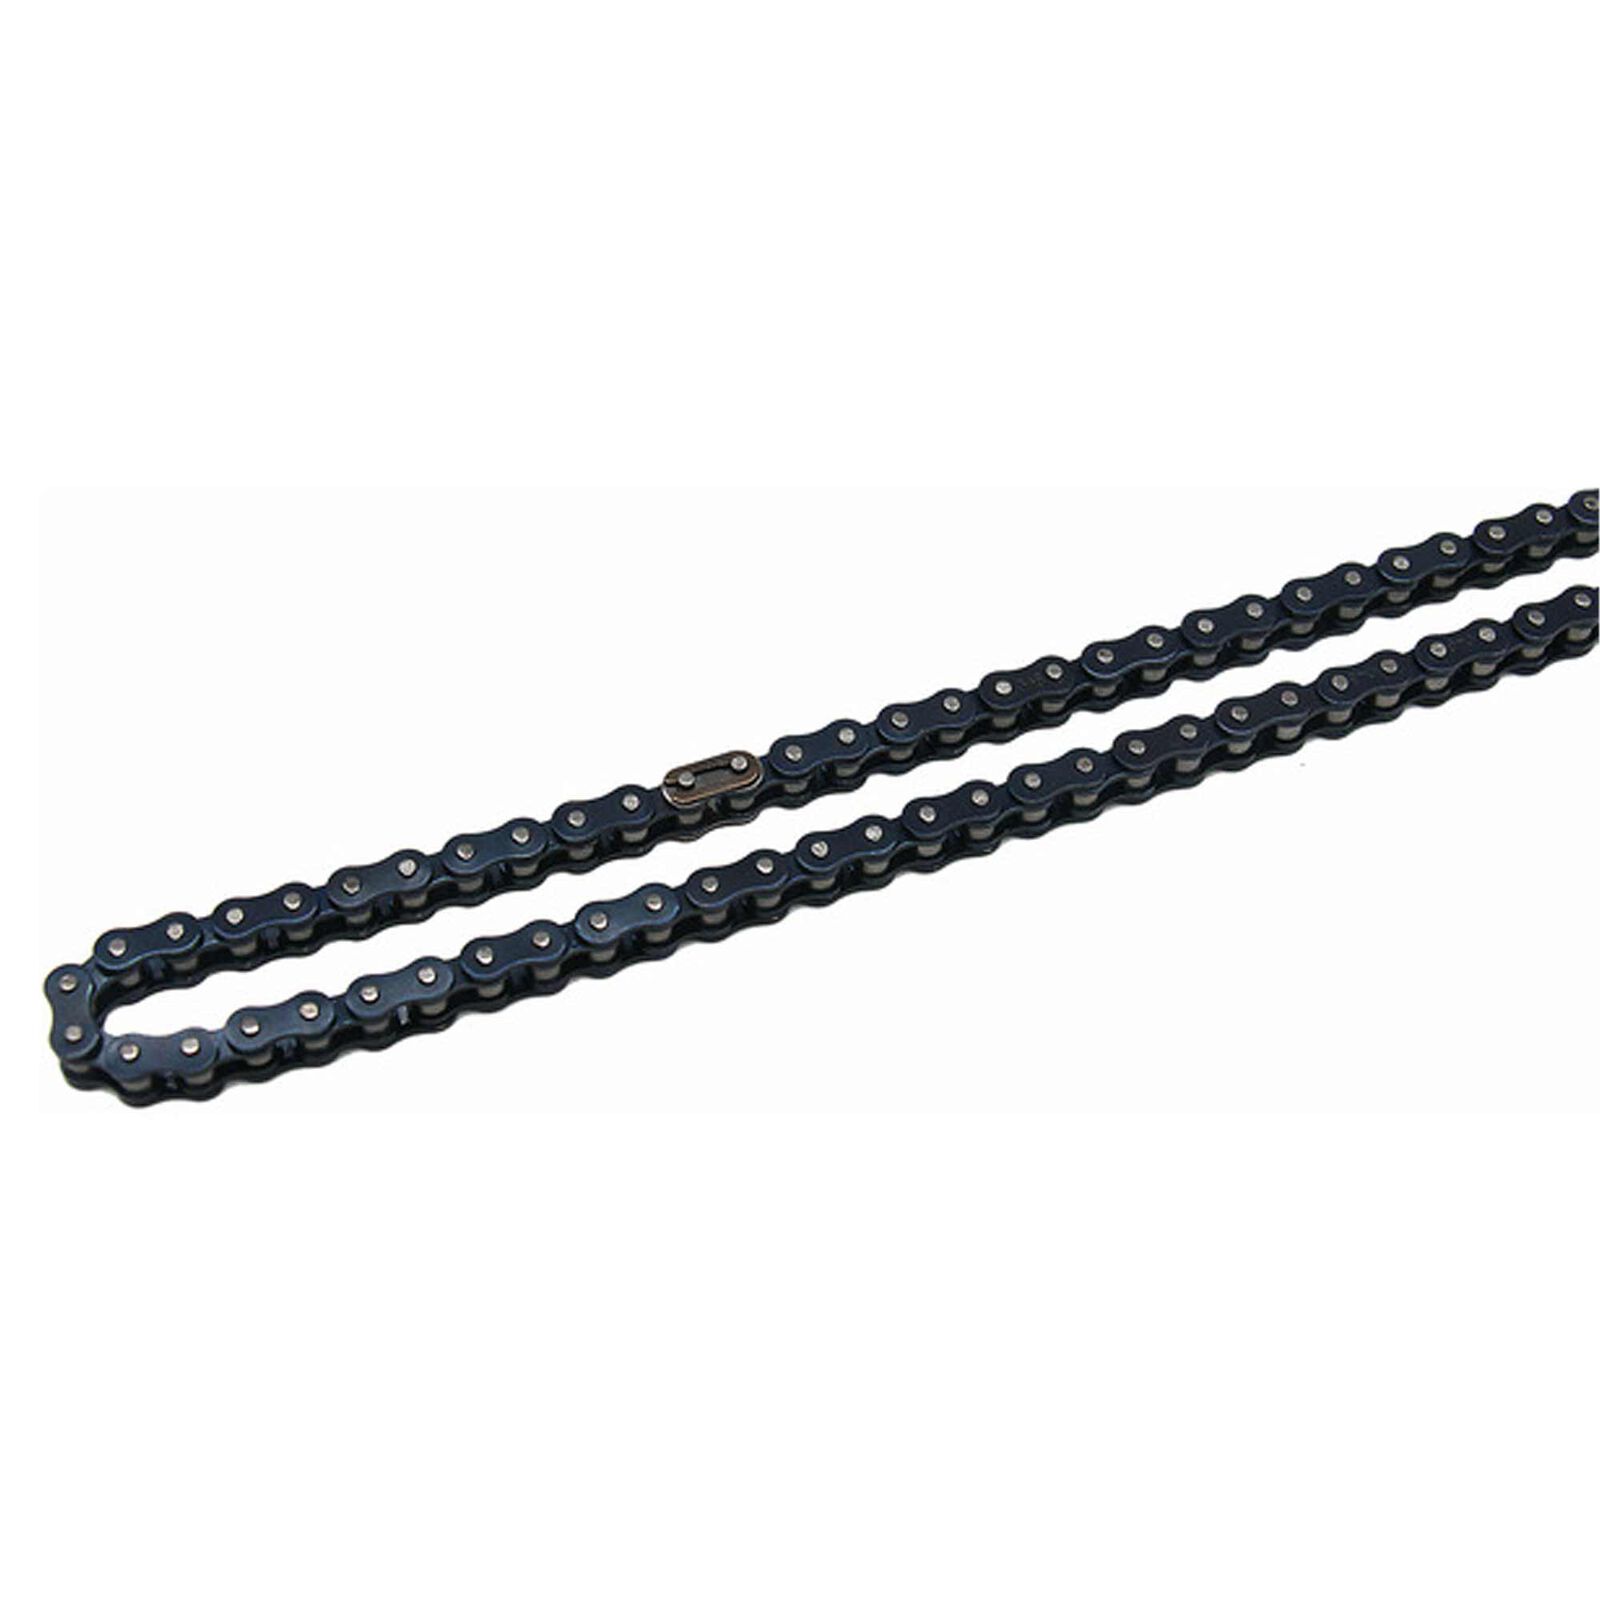 Steel Chain 70 Roller with Chain Connector: Losi Promoto-MX